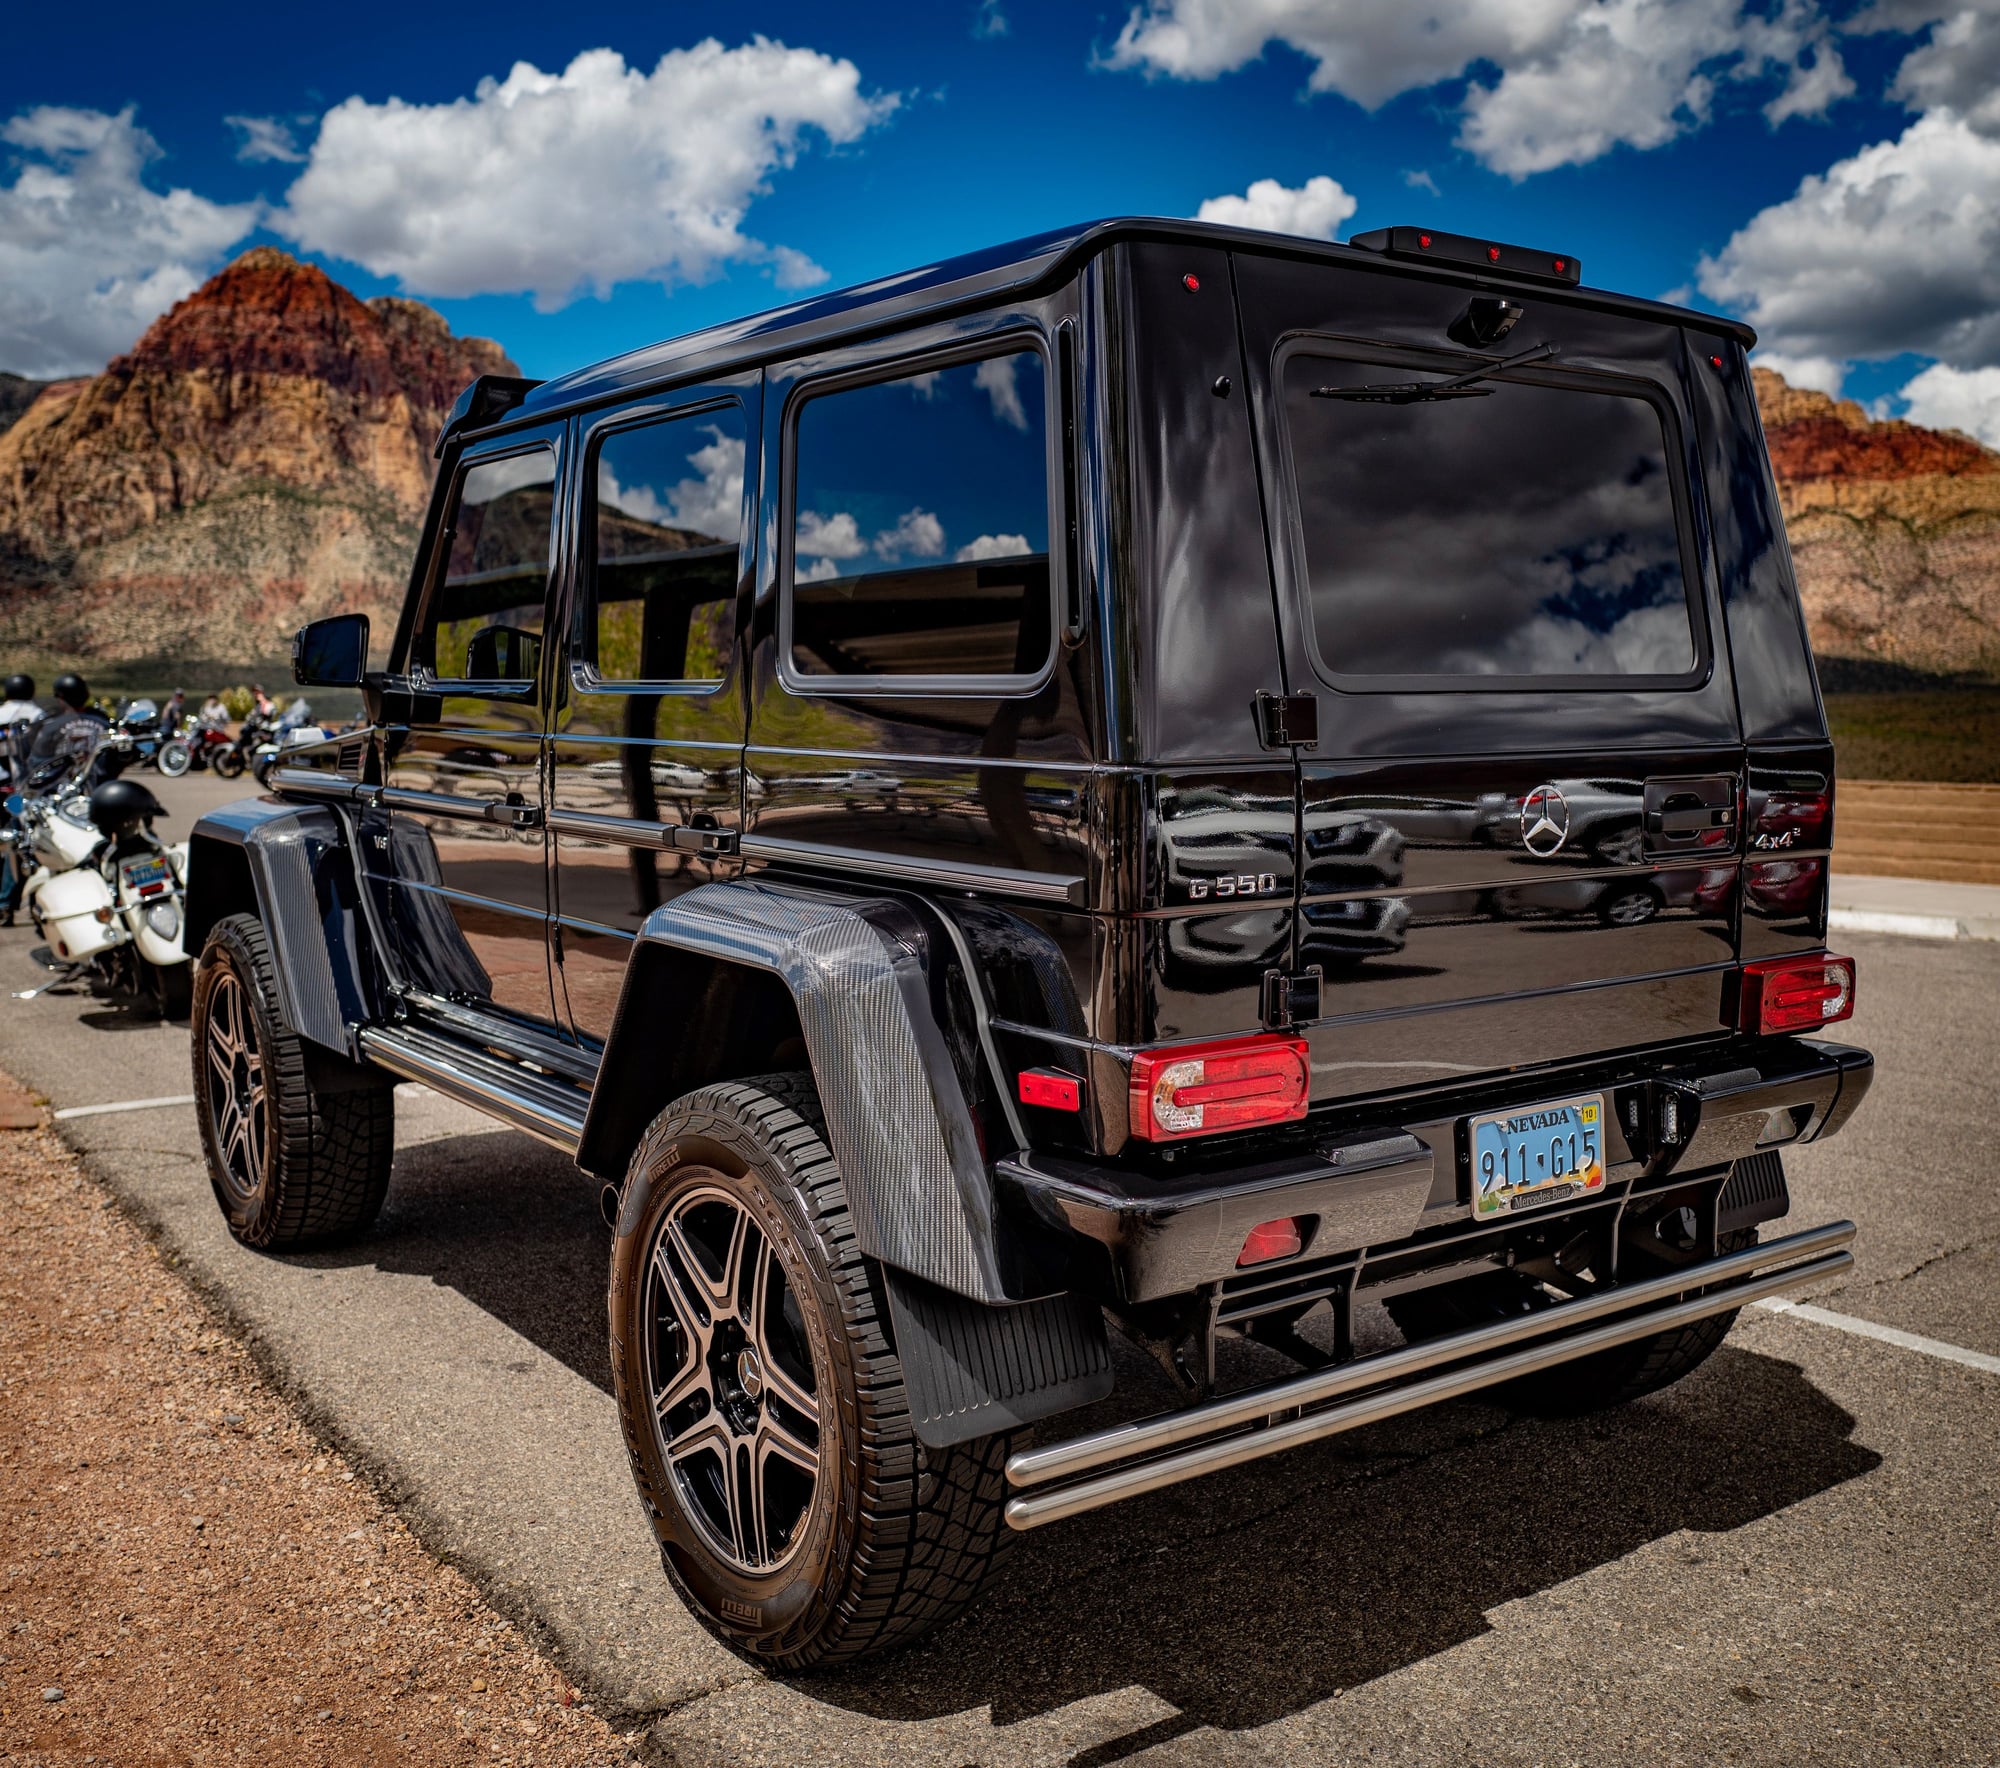 2017 Mercedes-Benz G550 - 2017 Mercedes G550 4x4 Squared For Sale - Used - VIN WDCYC5FF1HX281340 - 4,100 Miles - 8 cyl - 4WD - Automatic - SUV - Black - Las Vegas, NV 89138, United States